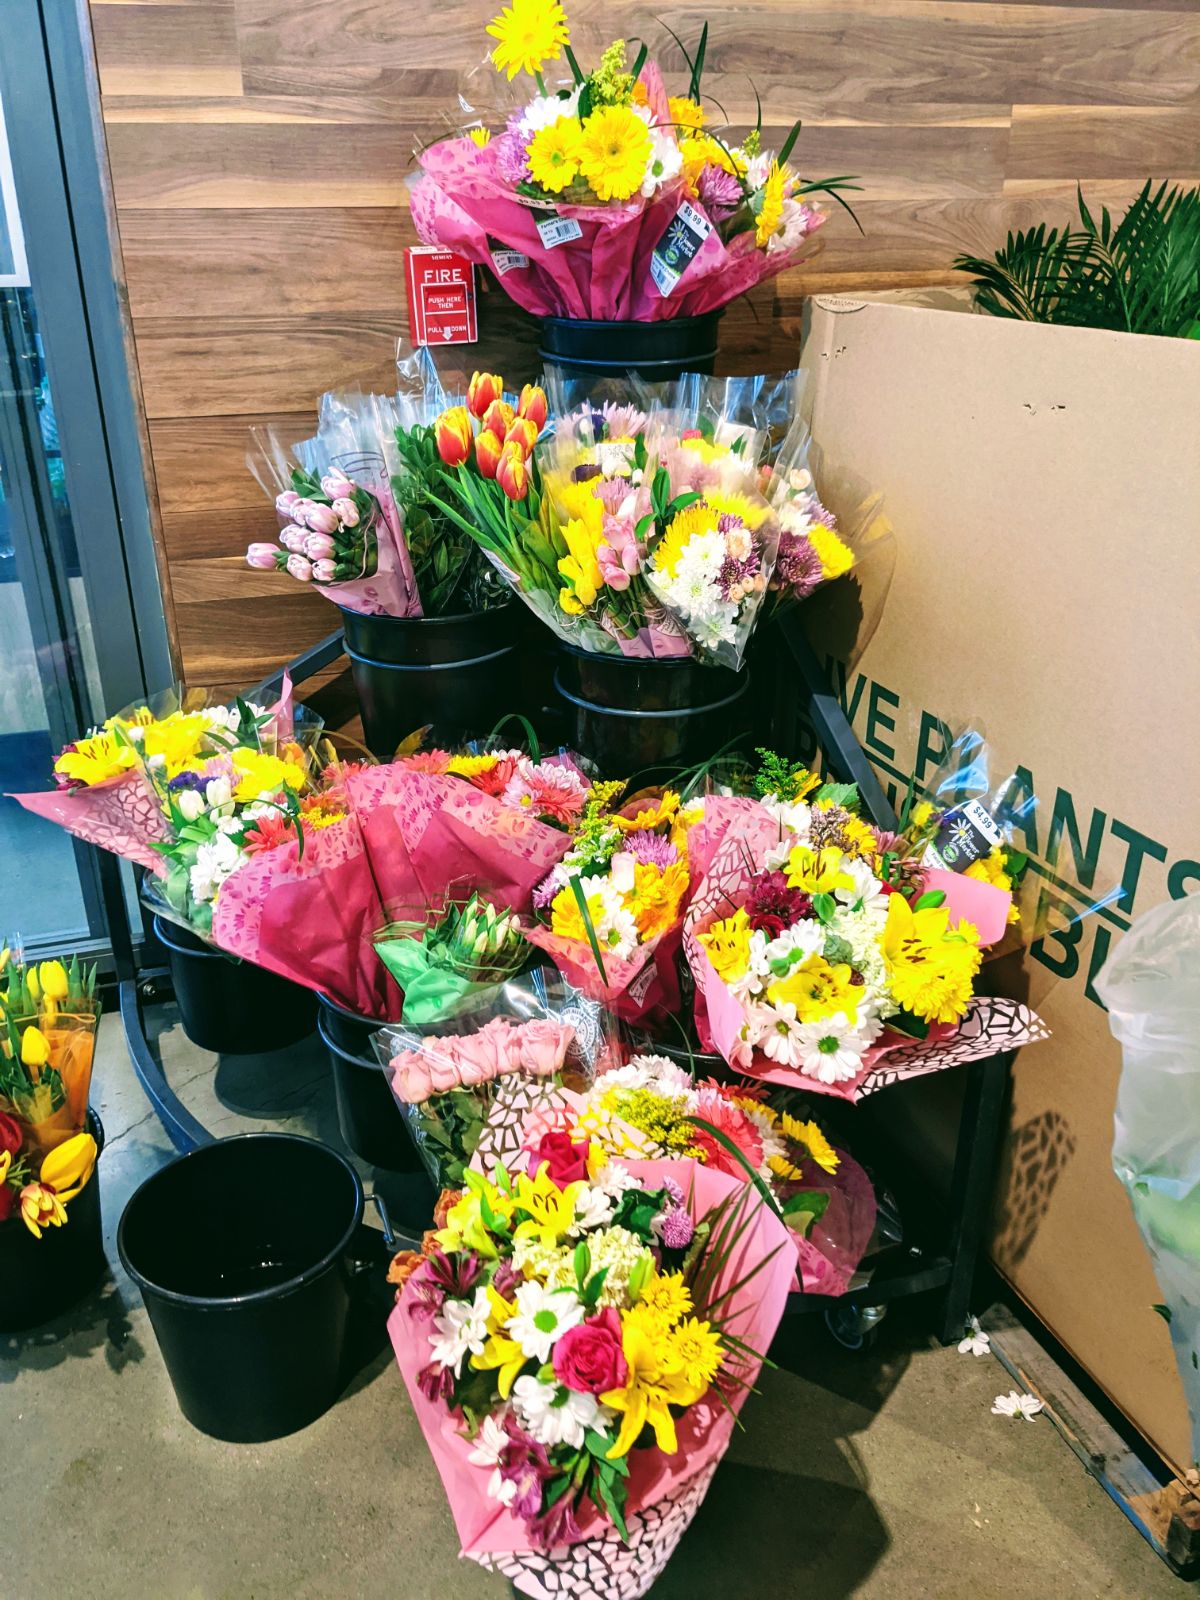 Lidl fresh flowers in bouquets for sale at Lidl Royersford Feb 22